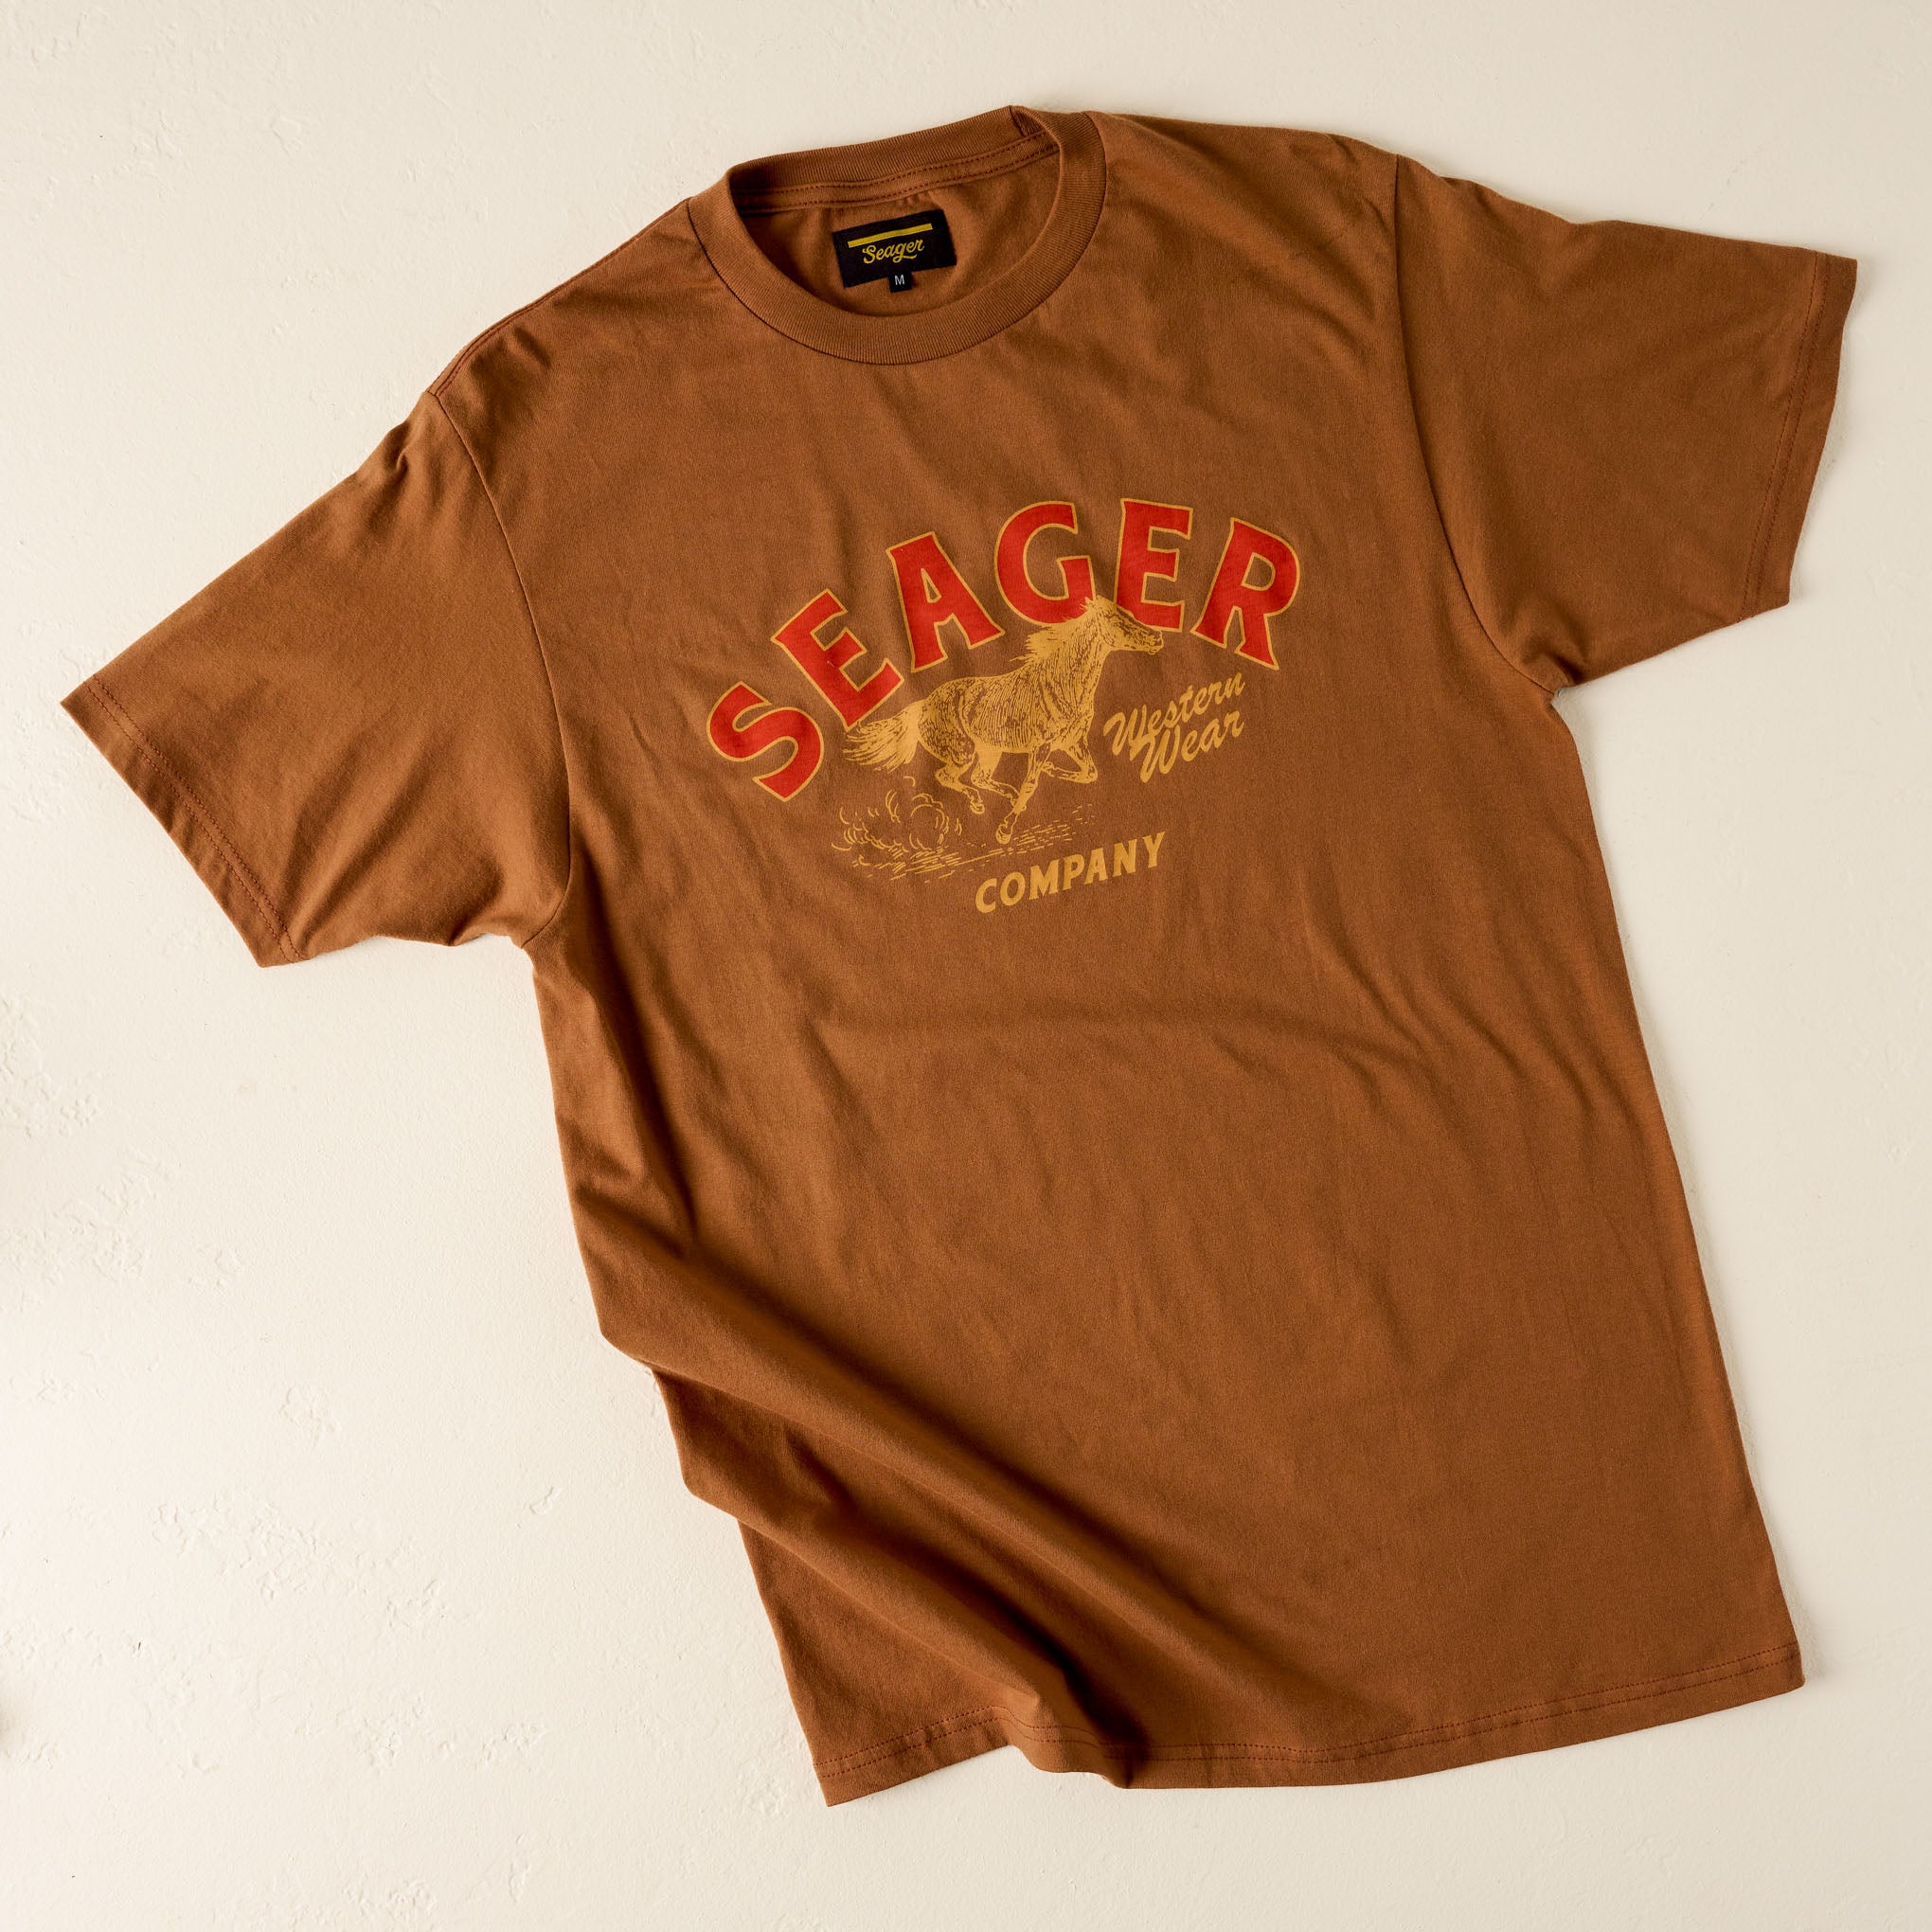 Seager Heritage Tee